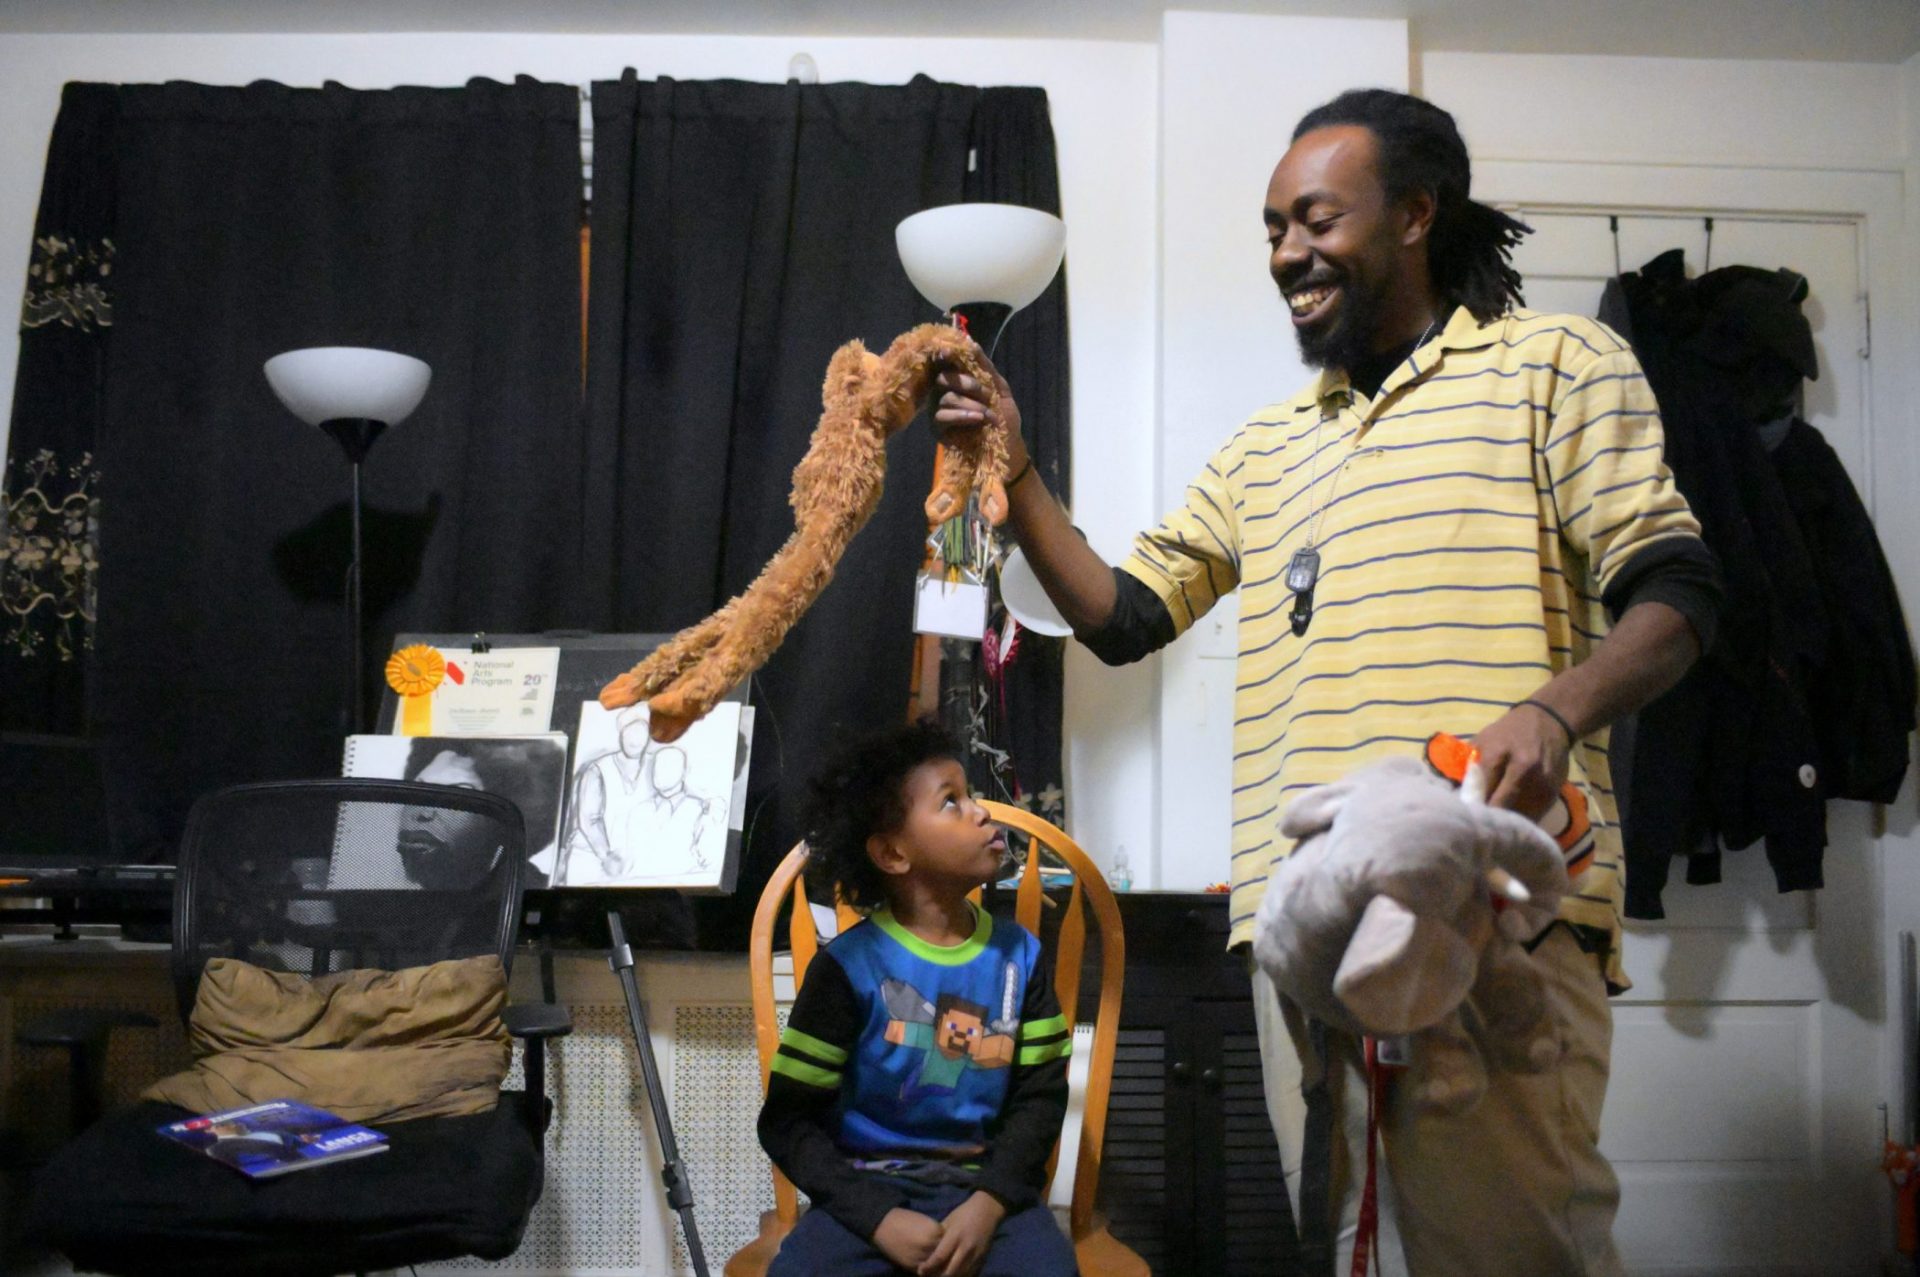 Single parent Deshaun Sherrill and his son Zay’ion Ventura-Sherrill clean up the living room of their home in West Philadelphia.